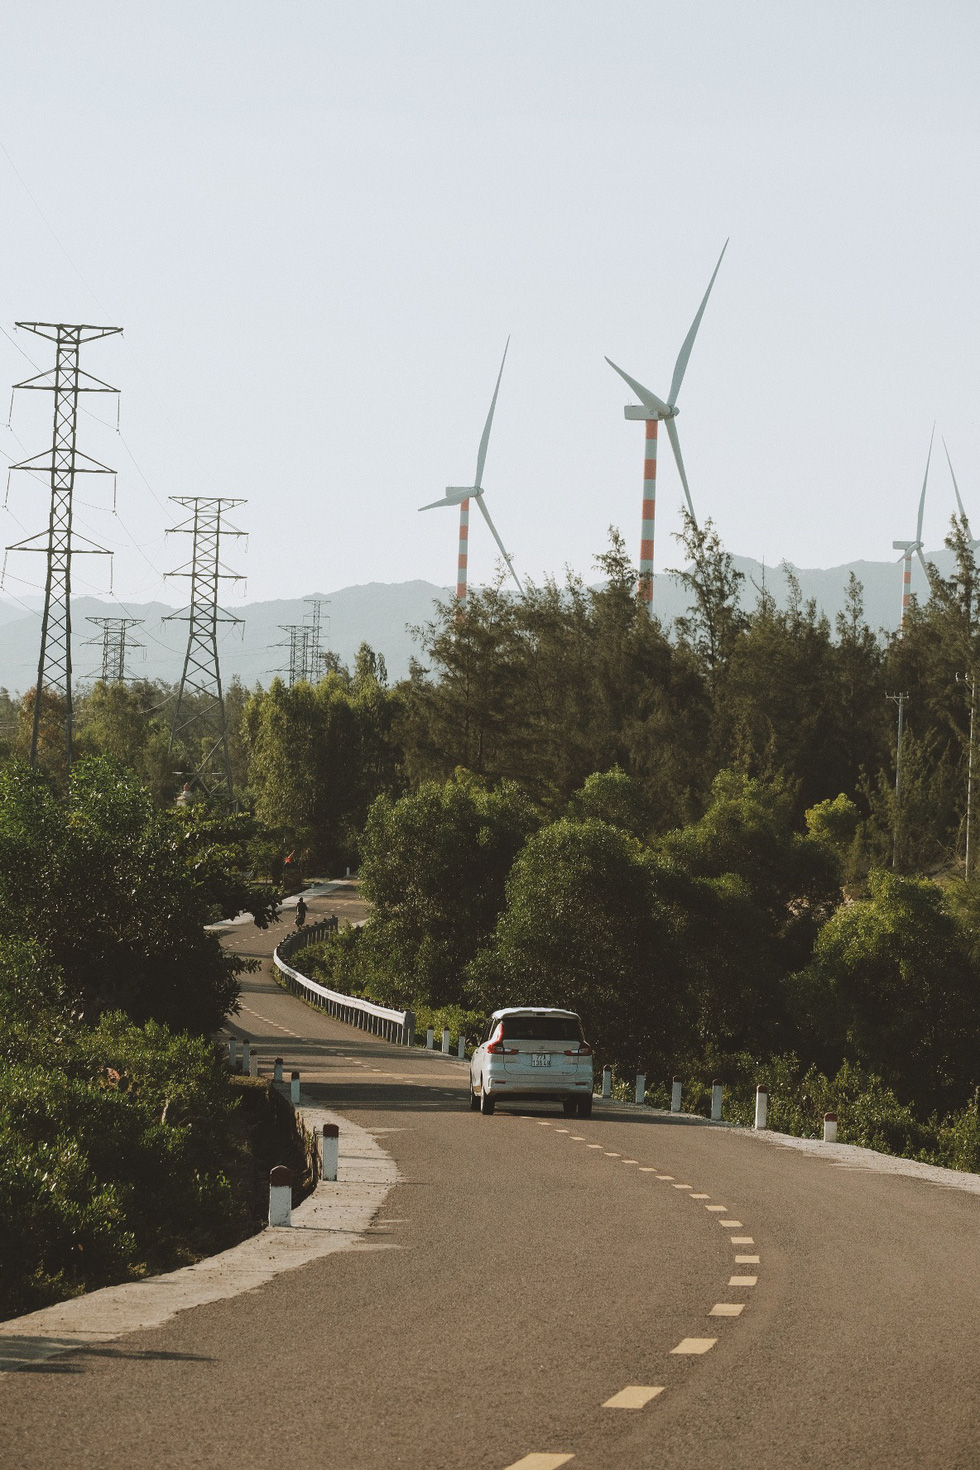 Vehicles travel against a background of wind turbines in Quy Nhon City, Binh Dinh Province, south-central Vietnam. Photo: Lo Huu Duc Anh / Tuoi Tre